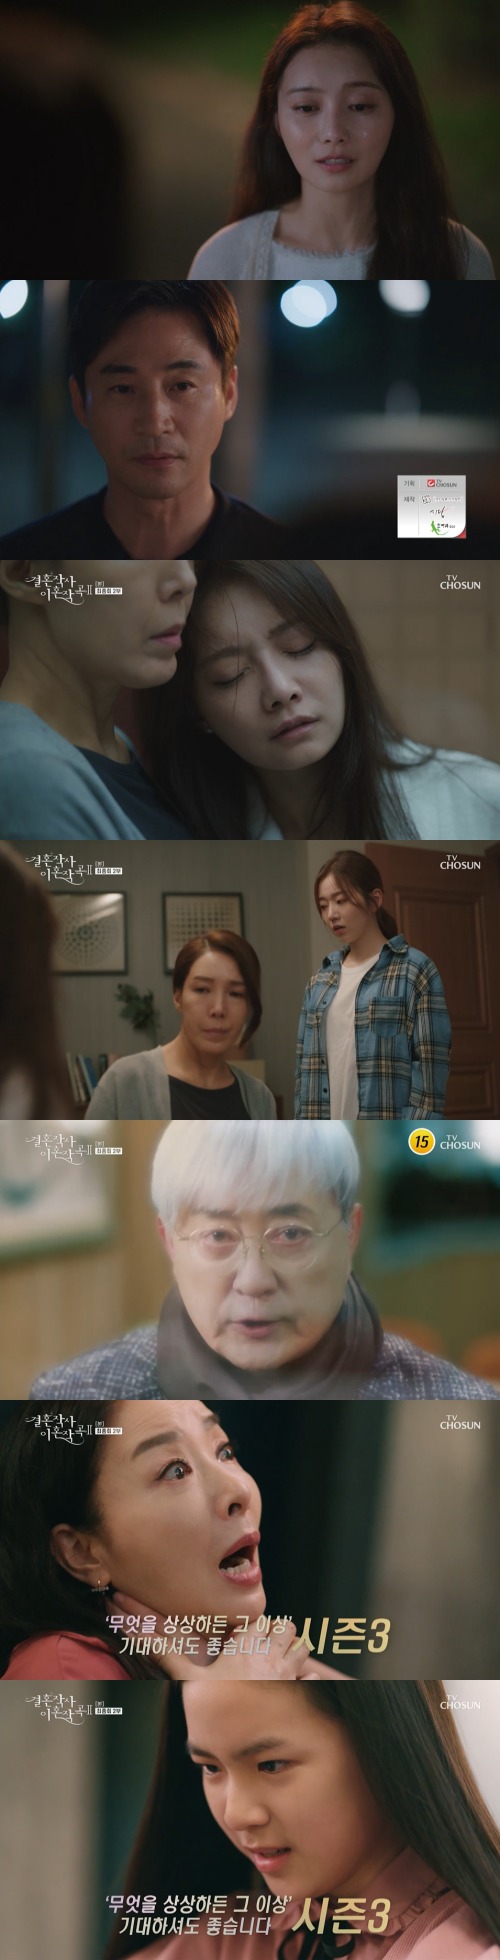 Seoul) = Divorce Composition 2 is ending and released a season 3 trailer that is out of imagination.In the TV weekend drama The Divorce of Marriage Writing 2 (played by Phoebe (Im Seong-han)/directed by Yoo Jung-joon and Lee Seung-hoon/hereinafter, The Join Song 2) broadcast on the 8th, an unbelievable development unfolded in the final scene.Seo Dong-ma (Boo Bae) visited Nam Ga-bin (Lim Hye-young); Nam Ga-bin refused to take Seo Dong-mas attention, saying, Im sorted, Im getting married.Seo Dong-ma then went out without a hitch, holding Nam Ga-bin, and Park Hae-ryun (played by Jeon No-min) called Nam Ga-bin but did not answer.Seo Dong-ma went to the department store and bought clothes, bags and shoes and put them on Nam Ga-bin. Seo Dong-ma asked Nam Ga-bin to drink wine at the park.Its not love for reason, its compassion, said Nam Gabin, who said, compassion is not civility for people; I want to be together, everything.I can open my eyes, but I do not wake up. I like you, but I do not think its love, said Nam Gabin to Park Hae-ryun, who came to me that night.Park Hae-ryun recalled This is.Safi-young (Park Joo-mi) called Shin Yu-shin (Lee Tae-gon) late at night, saying, The computer is broken. They went outside and drank. Shin Yu-shin asked me to call him whenever.And I presented Safiyoung with a bracelet: My heart doesnt change, it sounds like an excuse, but I walked straight and I was drunk and stumbled once, Shin Yusin said.Amy (Song Ji-in) appeared at this time. Safi-young had called Amy. Shin Yu-shins expression was hard.Nam Ga-bin stopped taking a bath late at night and suddenly drove away to go somewhere. His place was the house of This is (Mr. Jeon).Nam Ga-bin told This is anxious that Park Hae-ryun may be wrong.Nam Gabin, who was wearing a shower gown without wearing clothes properly, asked for forgiveness from This is, who divorced because of her, saying, My mother and father died because of me.This is worried about Nam Gabin. Nam Gabin cried, saying she wanted to see her parents. This is comforting her with her.Nam Ga-bin cried to forgive her for continuing to be wrong.Judge Hyun (Sung Hoon) asked Song Won (Lee Min-young) to have a simple wedding ceremony in the hospital room after giving birth, but when the screen was switched, Judge Hyun, who is going to marry Amy, appeared.Song Won then took the hand of Seoban (Moon Sung-ho) and got out of the car. Seo Dong-ma entered the wedding hall with Safi-young.And Shin Ji-ah (Park Seo-kyung) tried to strangle Kim Dong-mi by being Spirit-possession of the soul of Shin Ki-rim (Noh Joo-hyun).